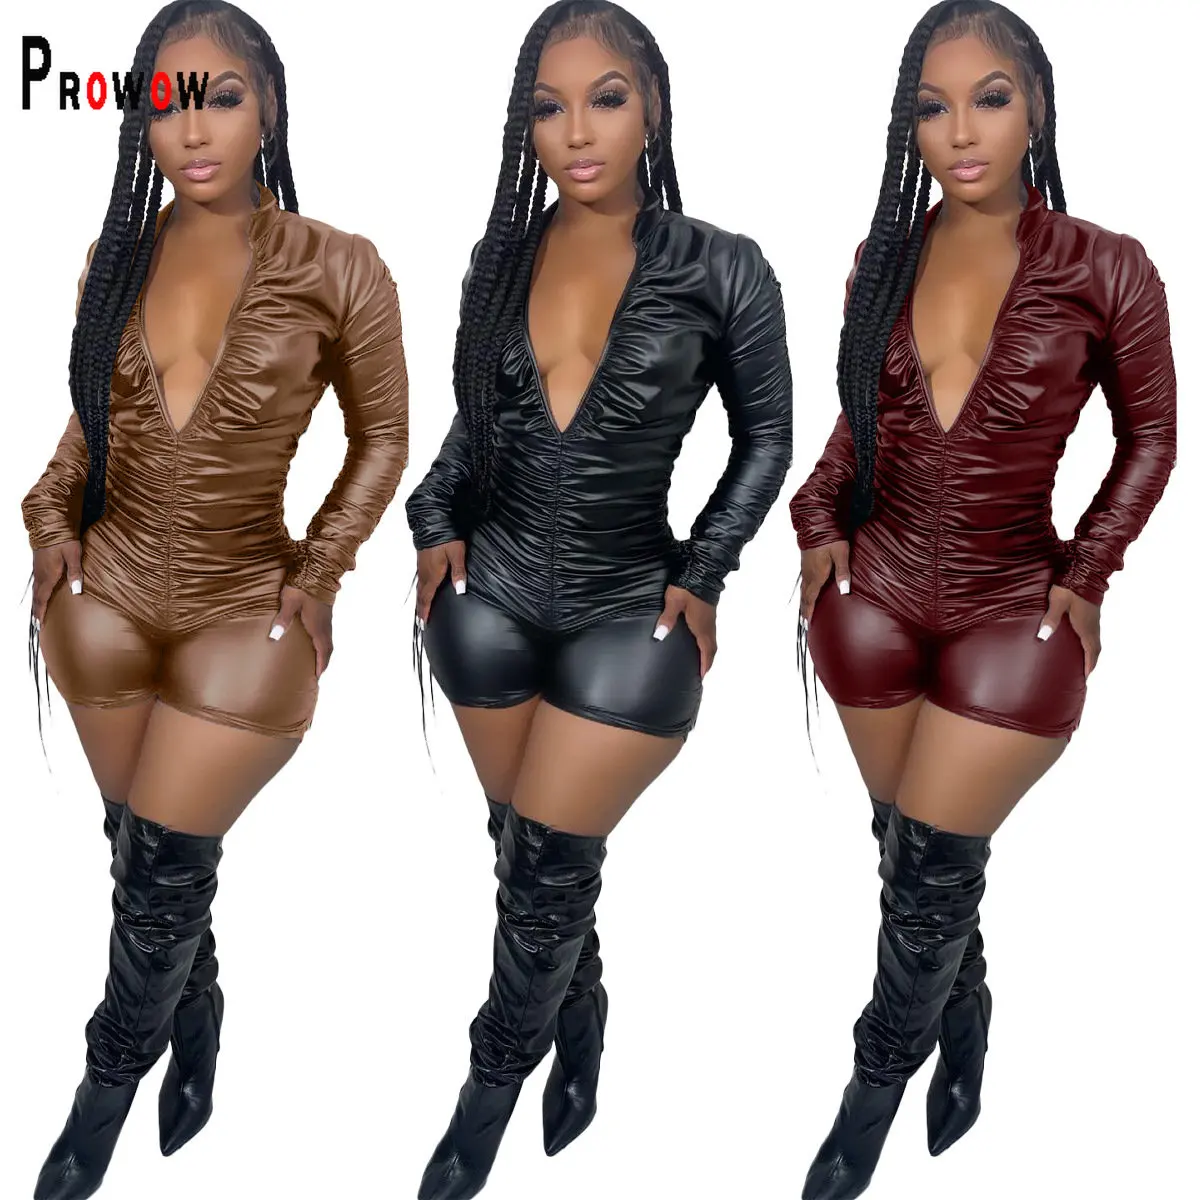 

Prowow Fashion Pu Women Playsuits Folds Long Sleeve High Strench V-neck One-piece Sexy Romper Spring Summer Female Slim Clothing